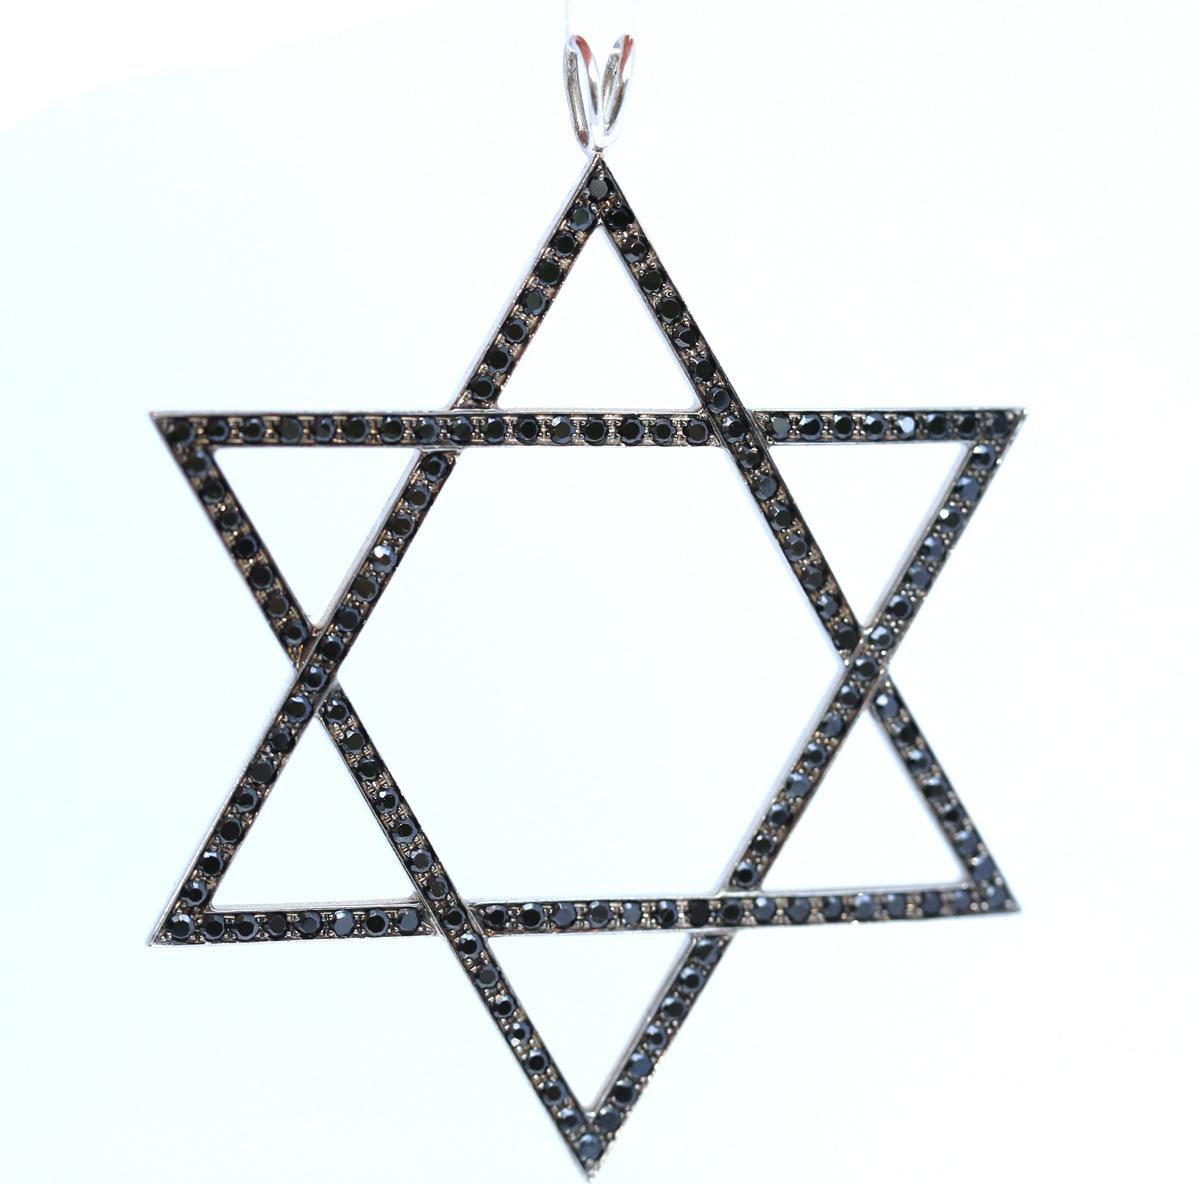 Magen David is an ancient Judaic symbol in it’s modern very clean and stylish interpretation. 18K White Gold with Onyx.
A proud symbol of identity and cool outfit accessory. The chain hole is quite large to accommodate a thick band or ribbon.
Please